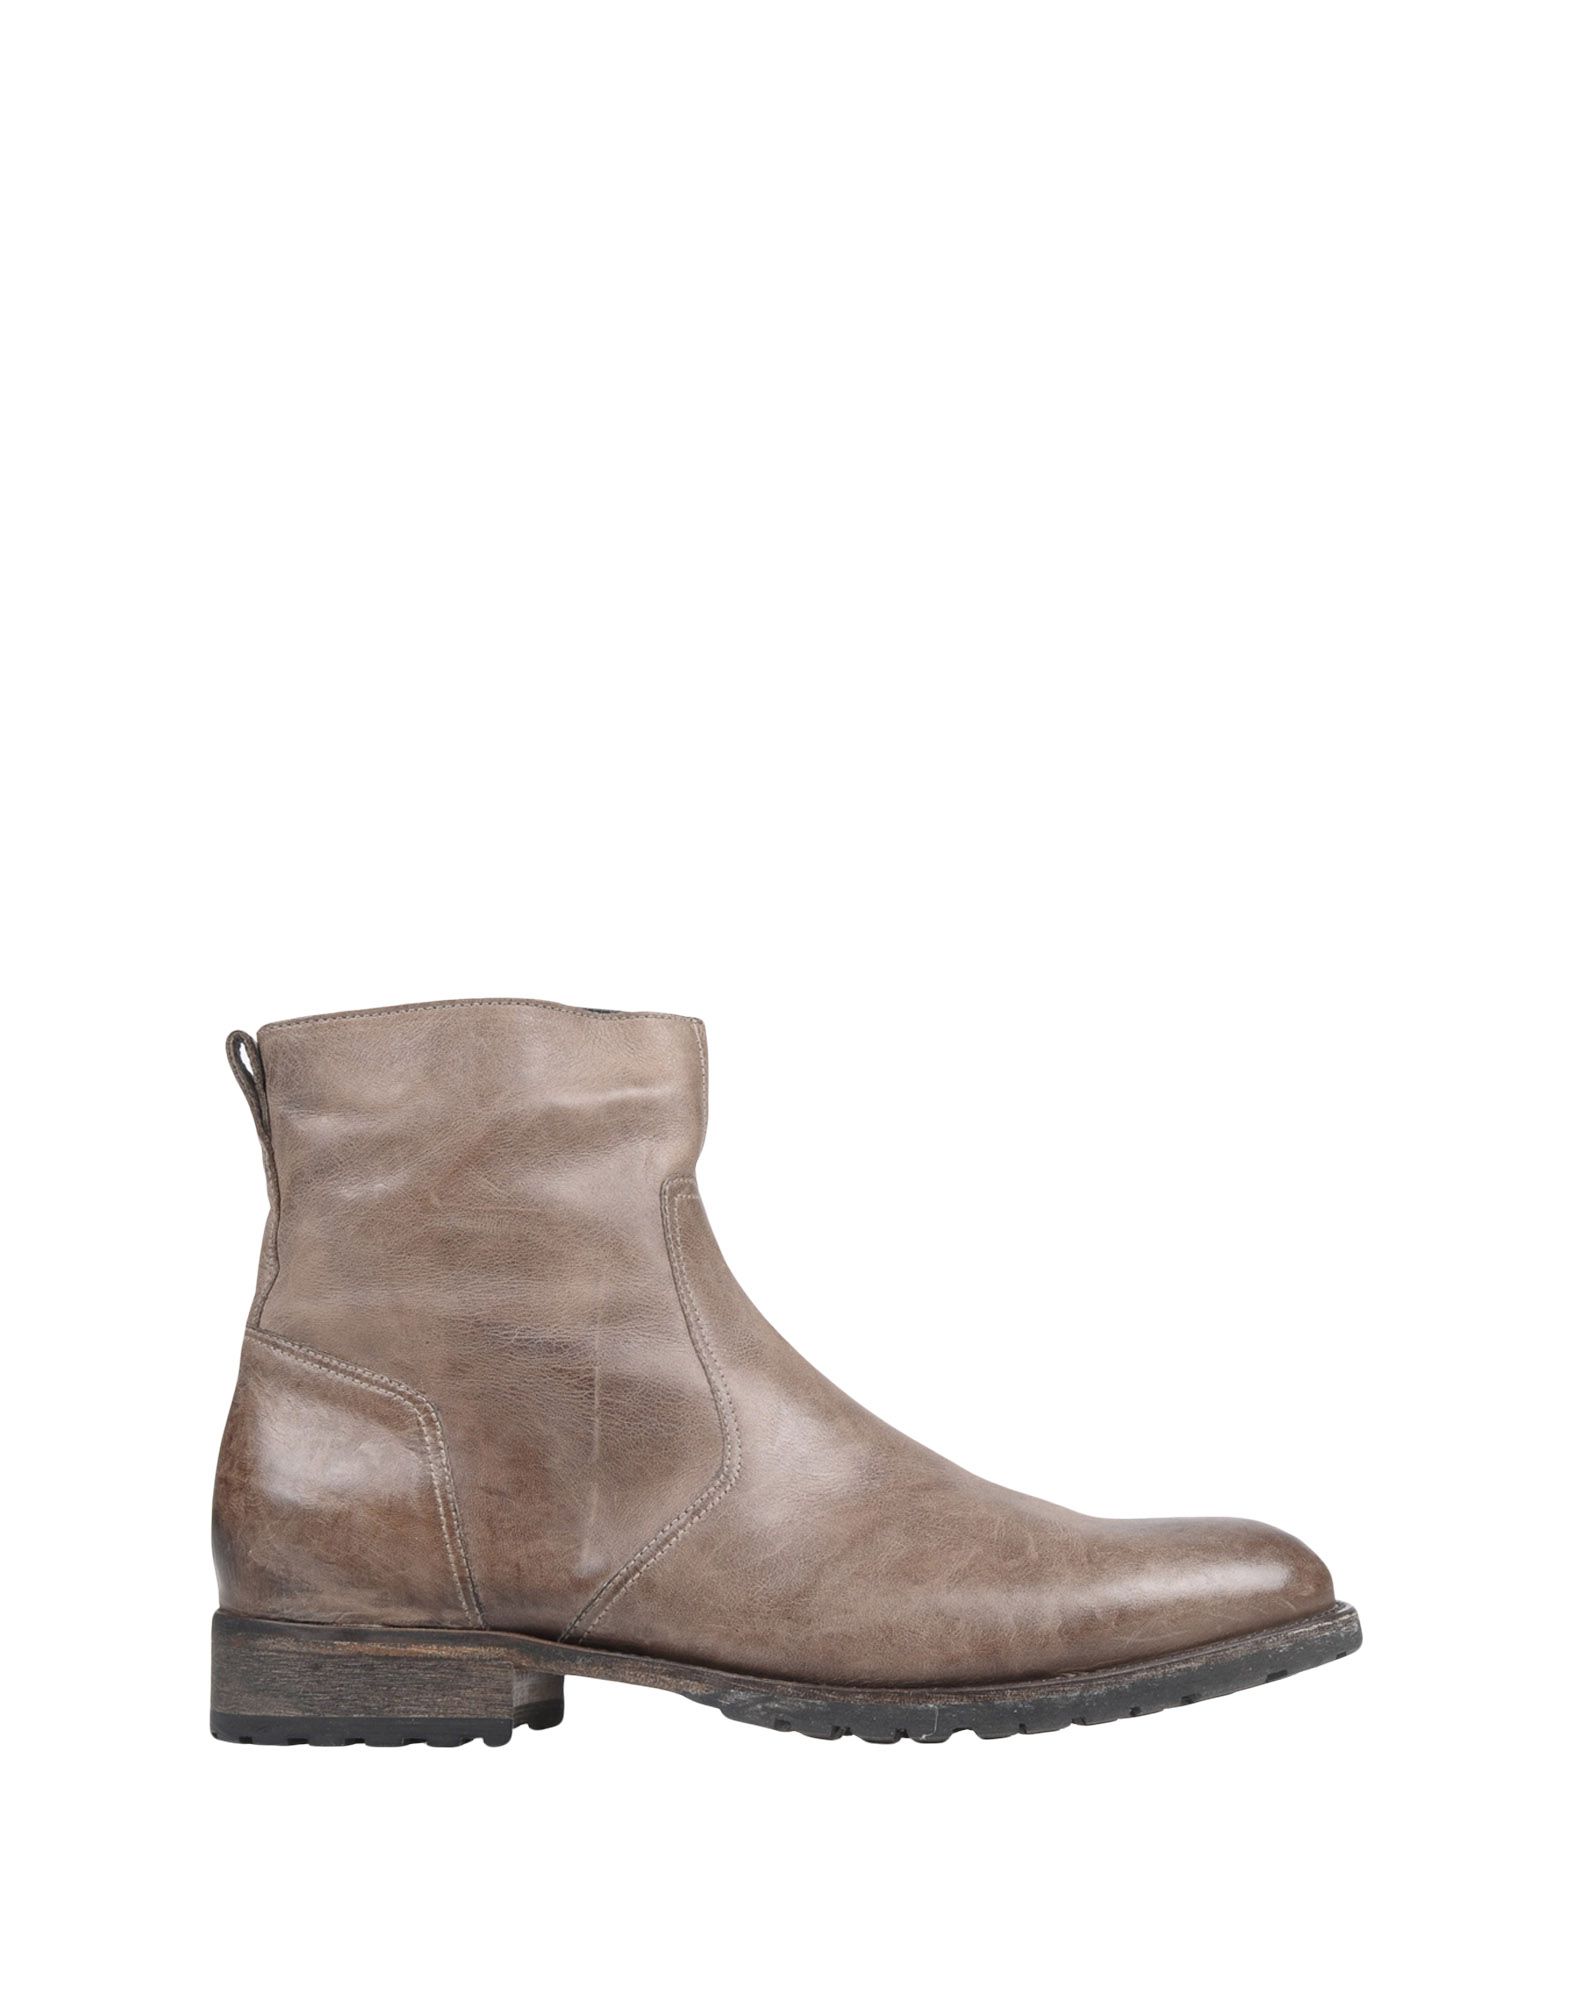 belstaff ankle boots